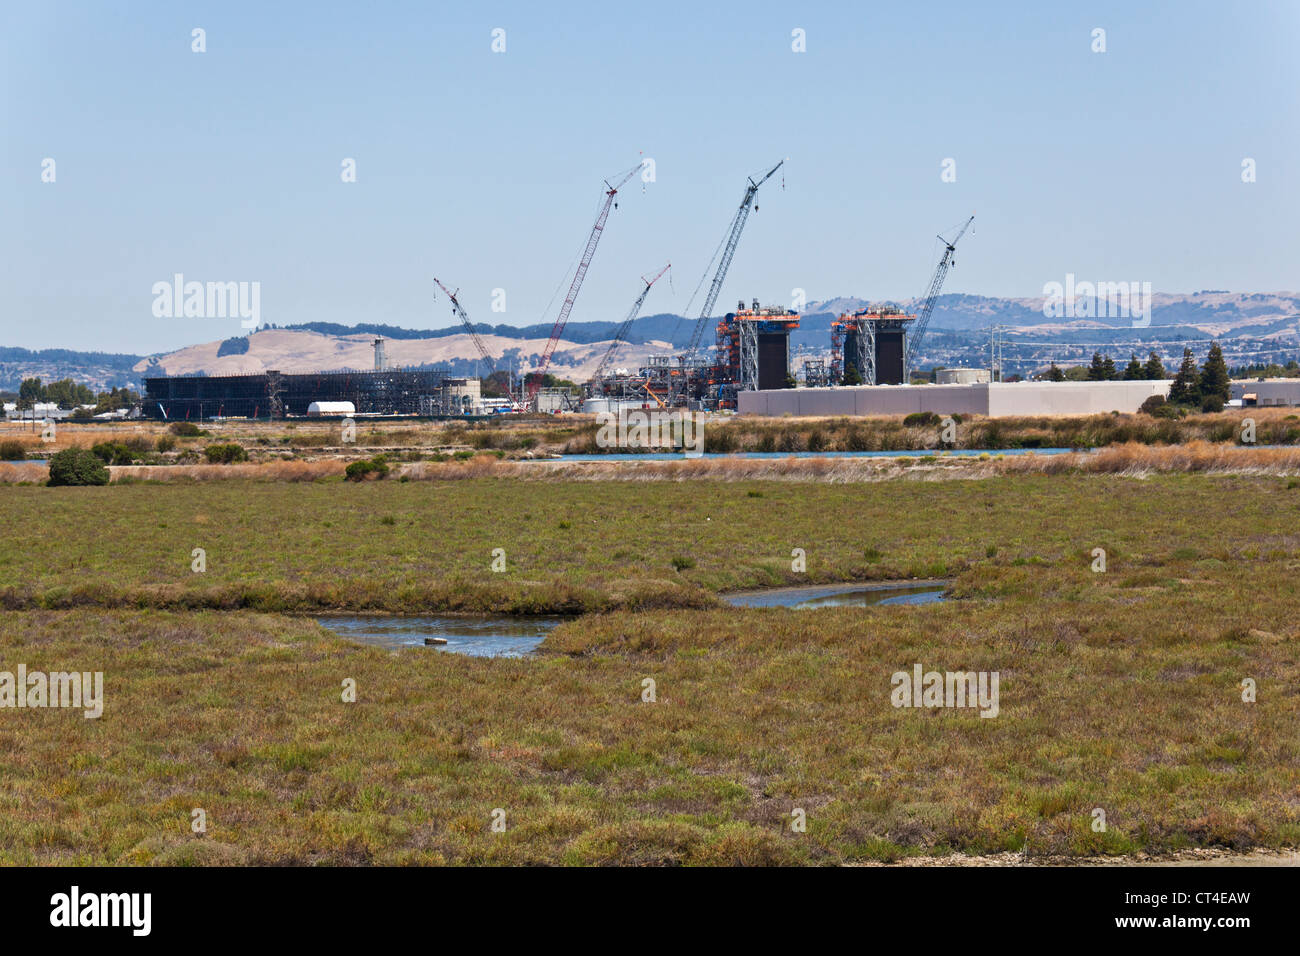 A natural gas fired power plant is under construction near marshes and wetlands along San Francisco Bay. Stock Photo